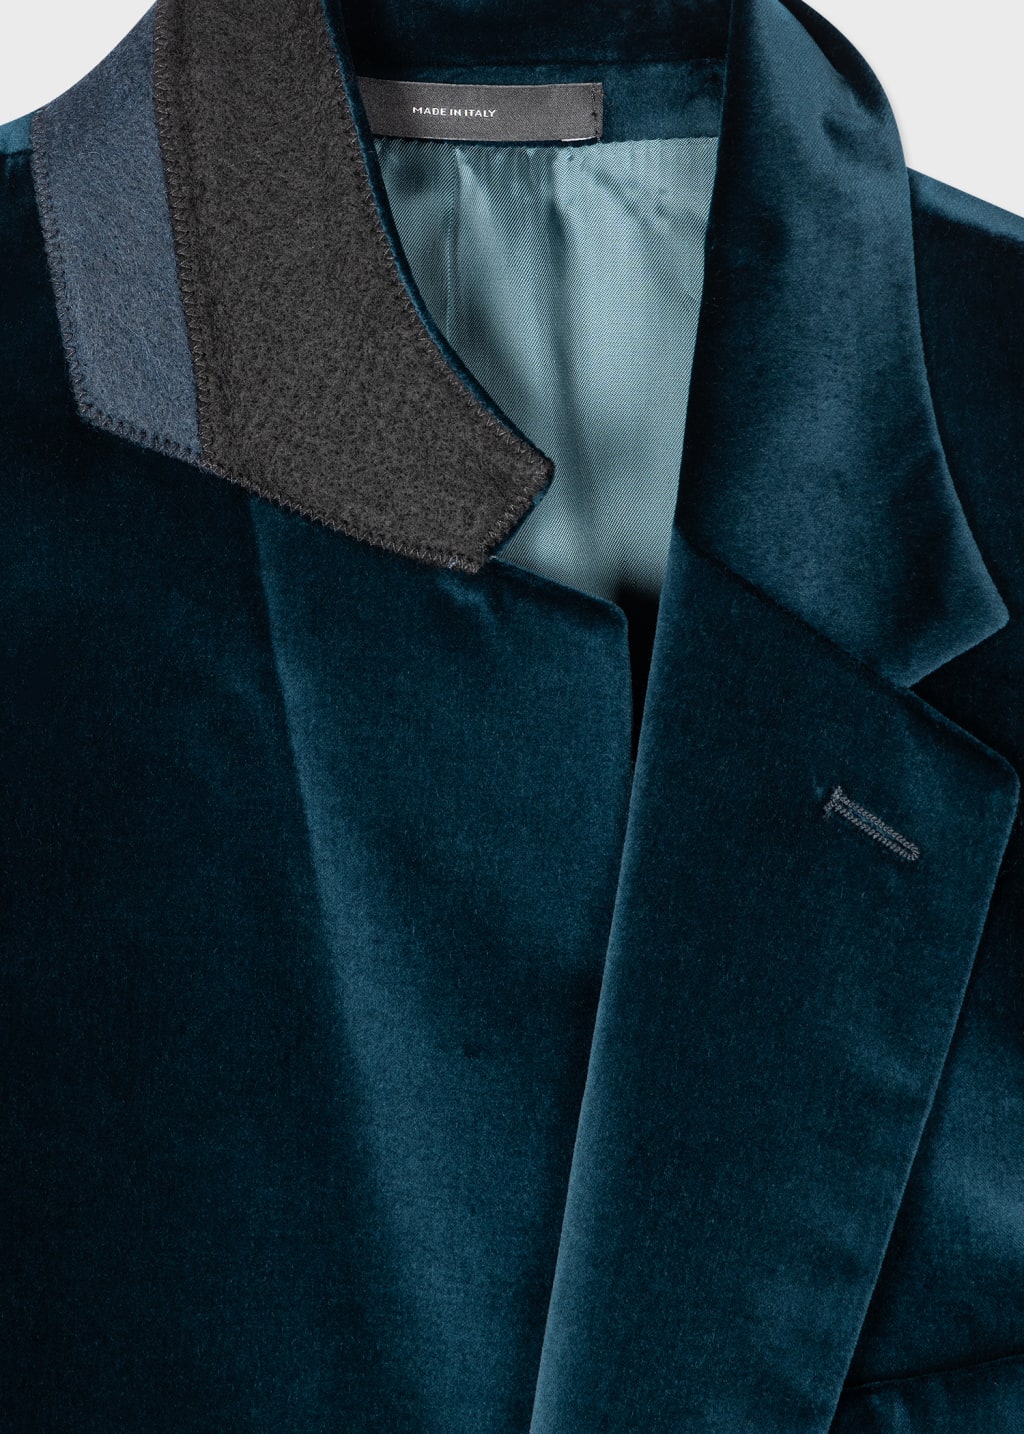 Product View - The Soho - Tailored-Fit Navy Velvet Blazer by Paul Smith